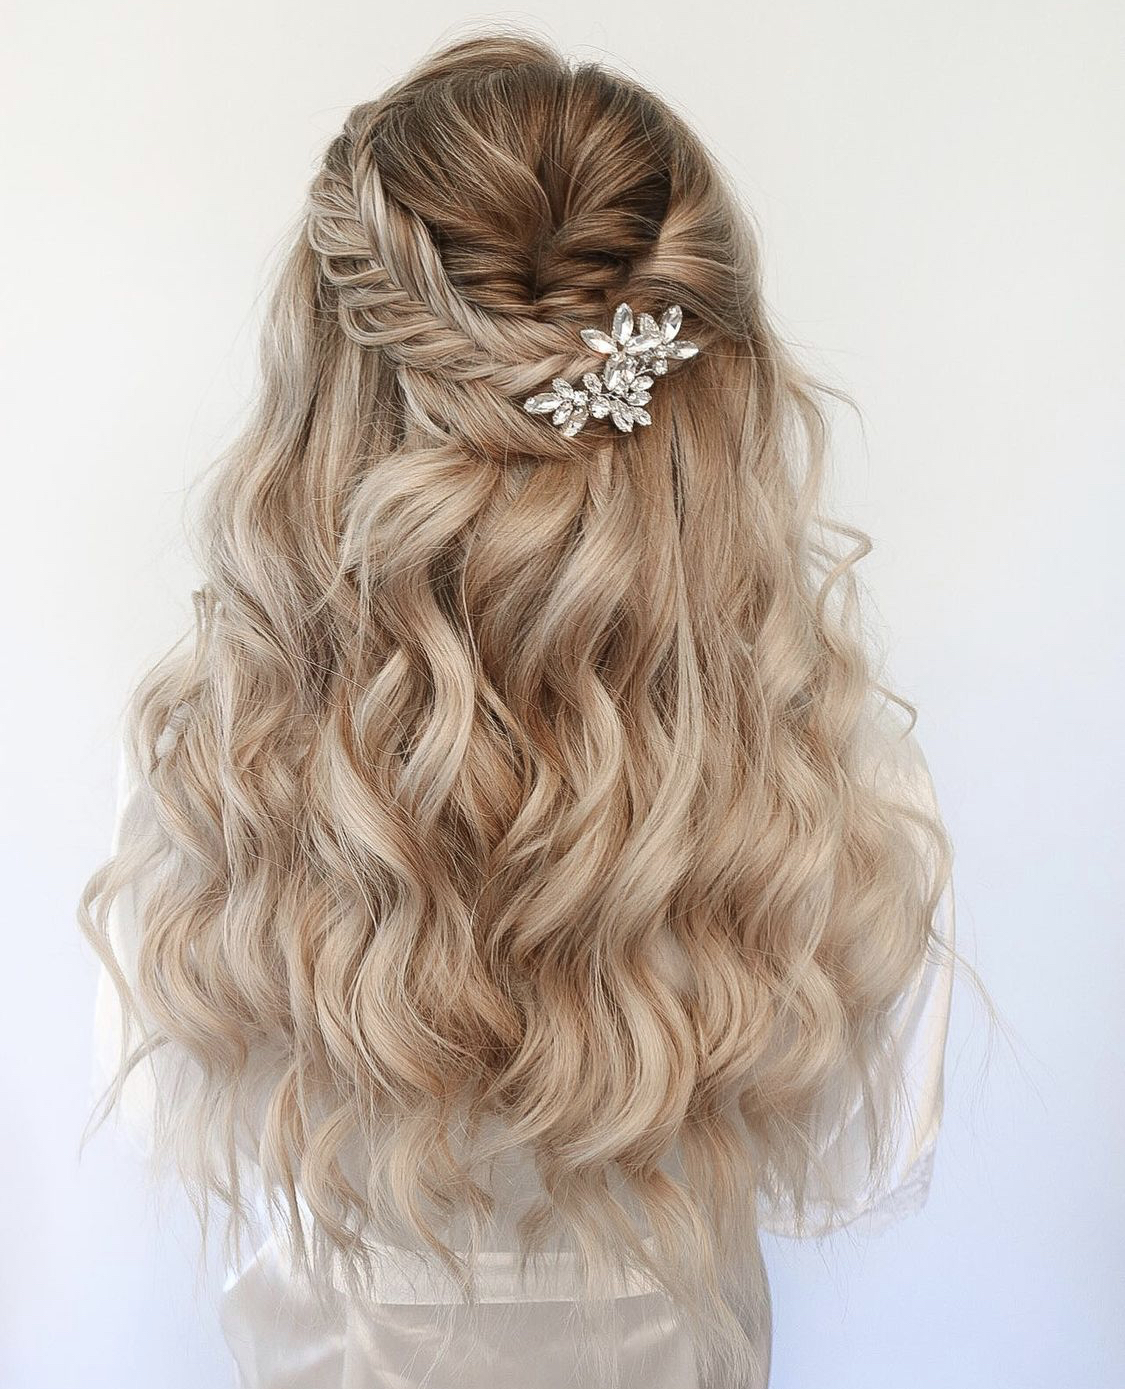 How to Choose the Perfect Wedding Hair